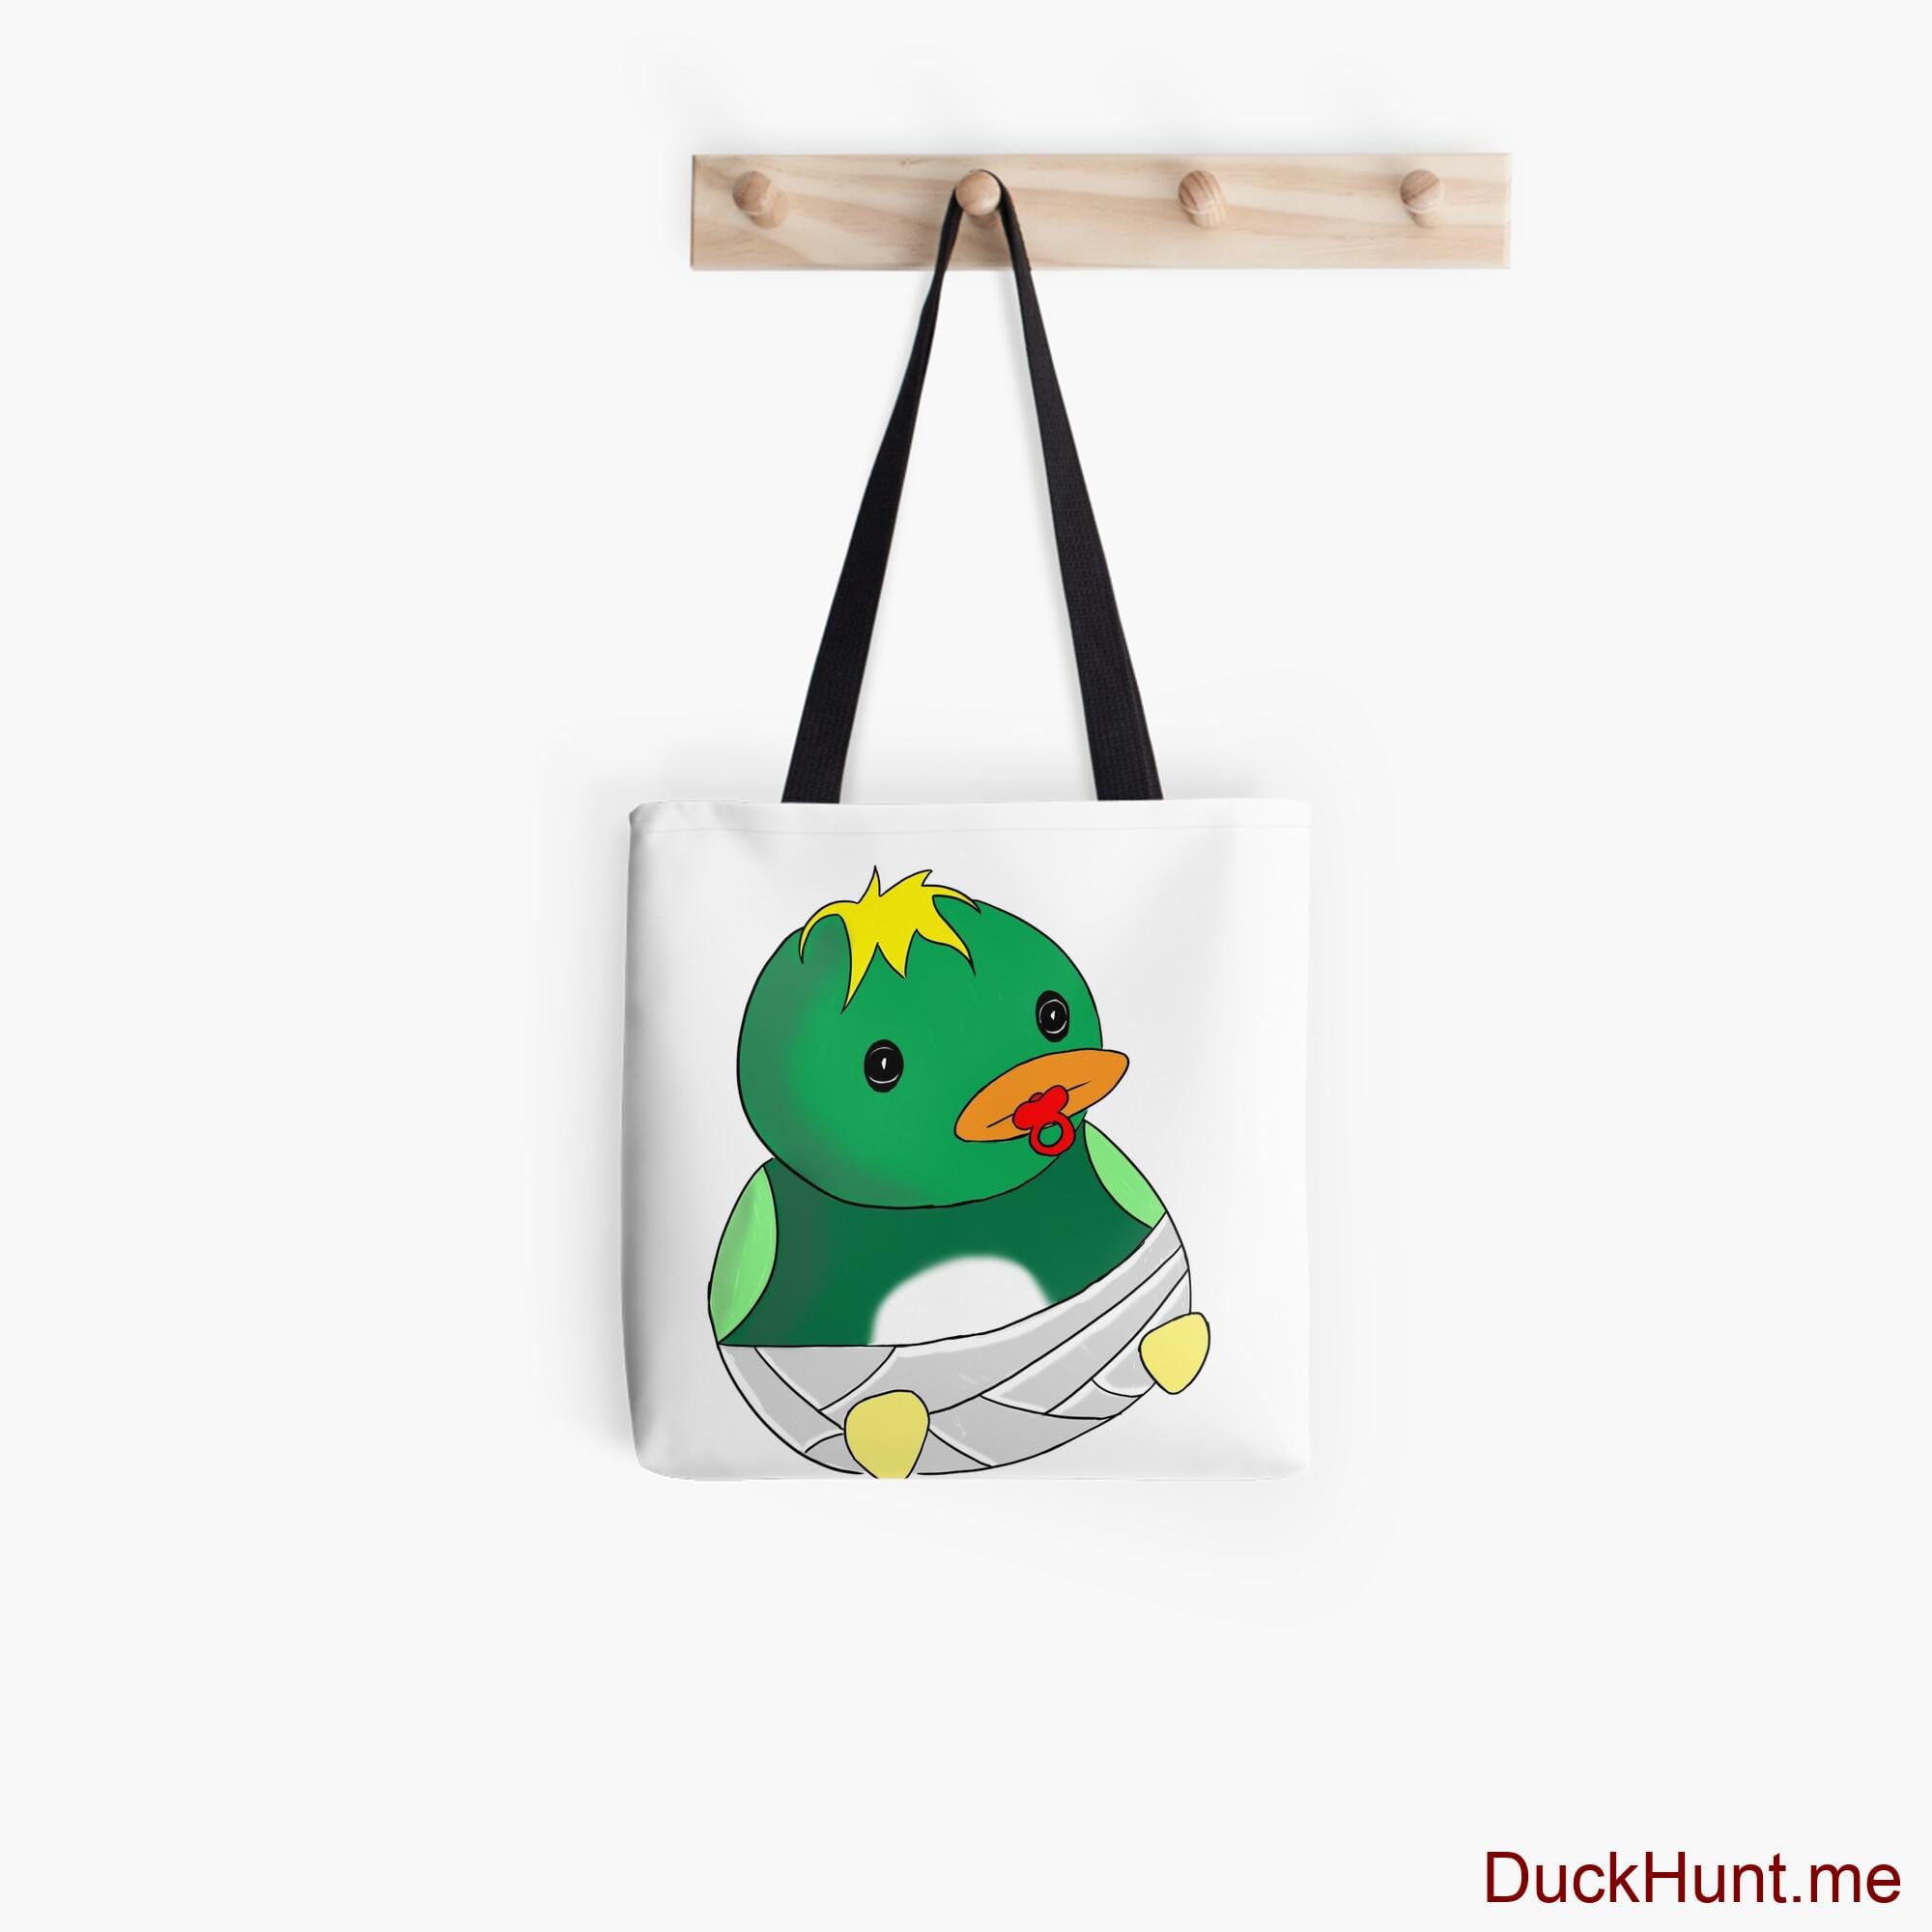 Baby duck Tote Bag